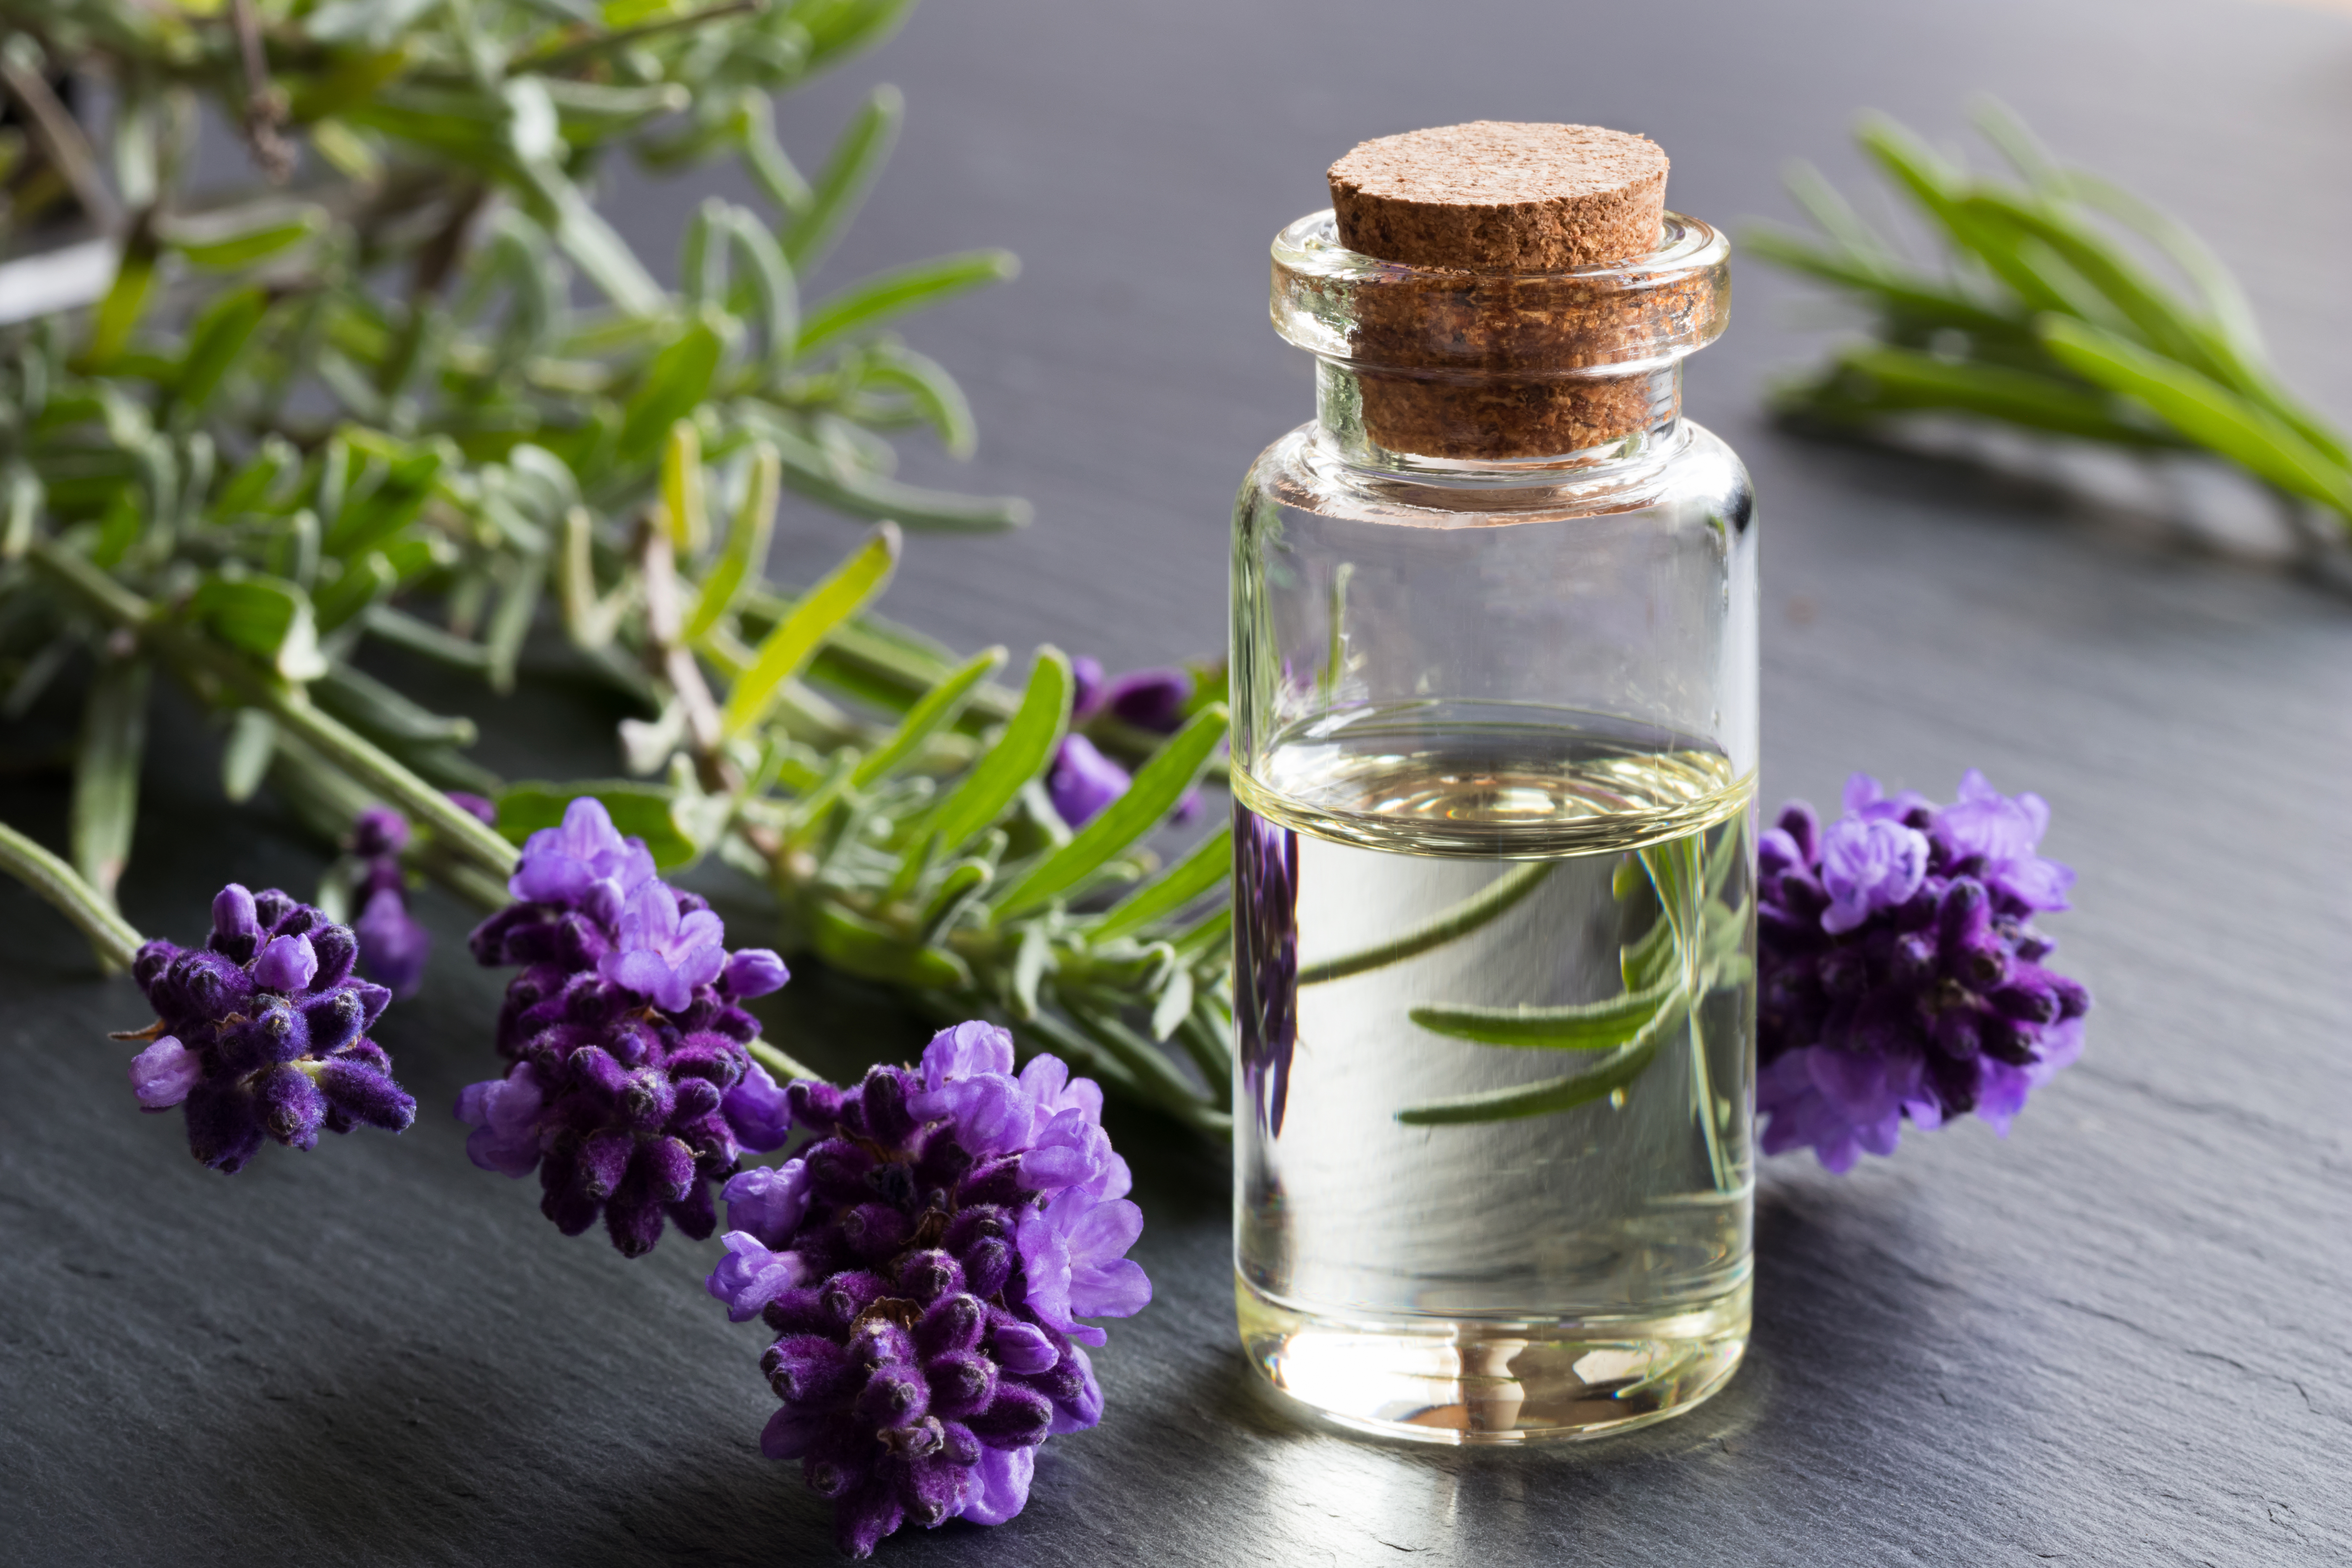 What Are the Benefits of Eating Lavender?